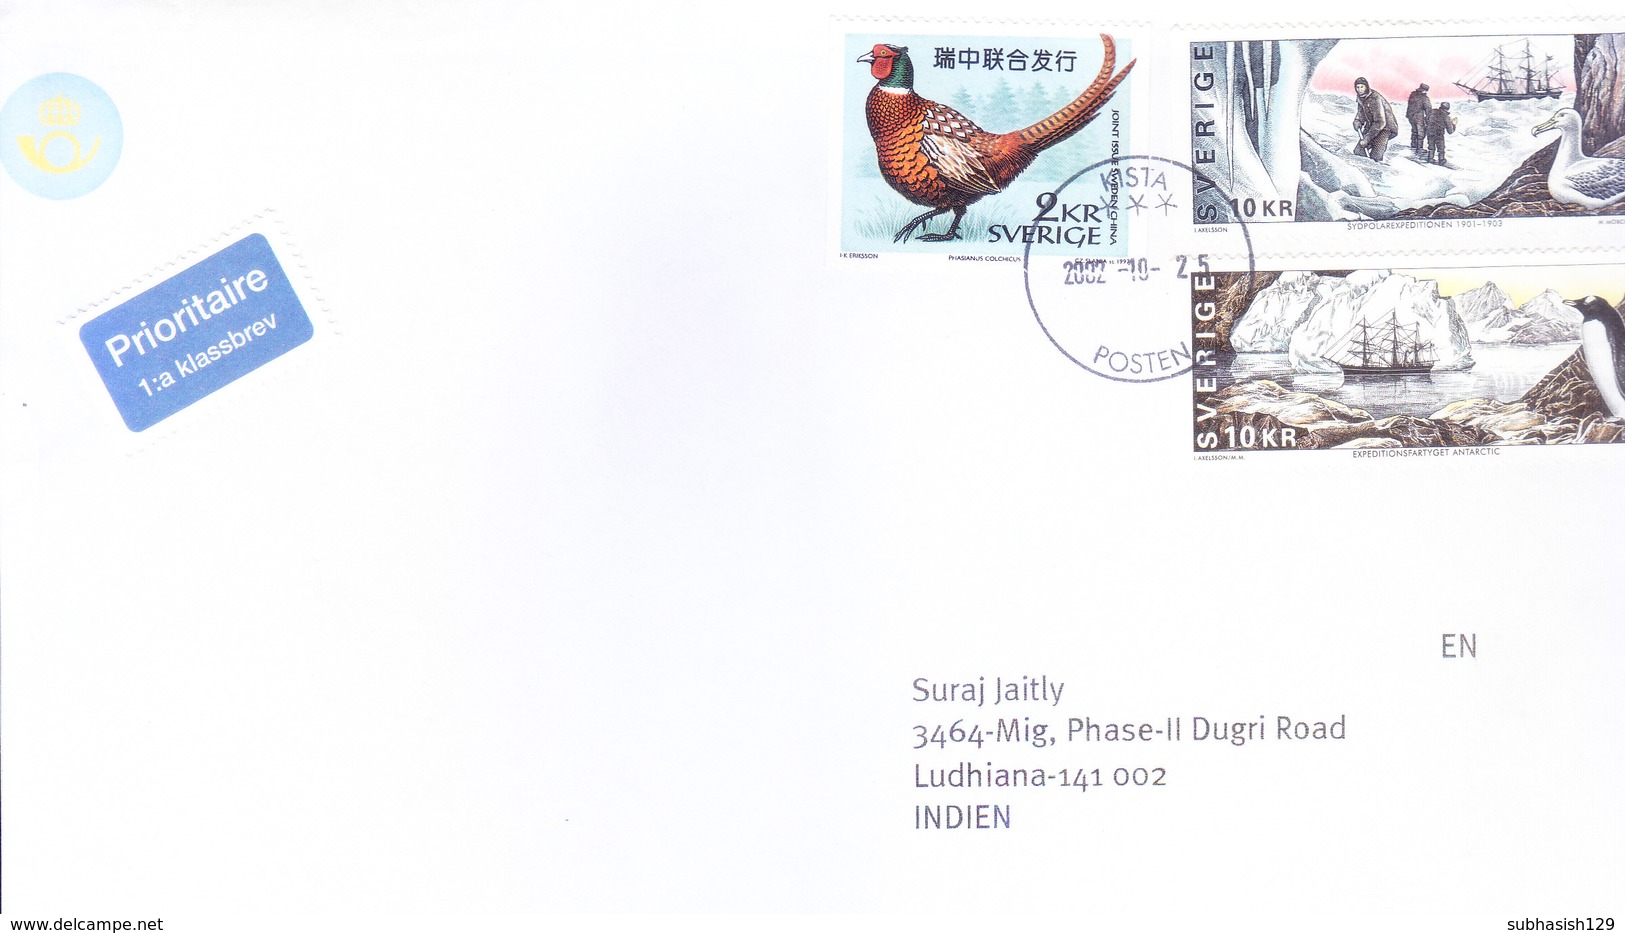 SWEDEN 2002 COMMERCIAL COVER POSTED FROM KISTA FOR INDIA - ANTARCTIC EXPEDITION STAMP, SWEDEN CHINA JOINT ISSUE STAMP - Brieven En Documenten